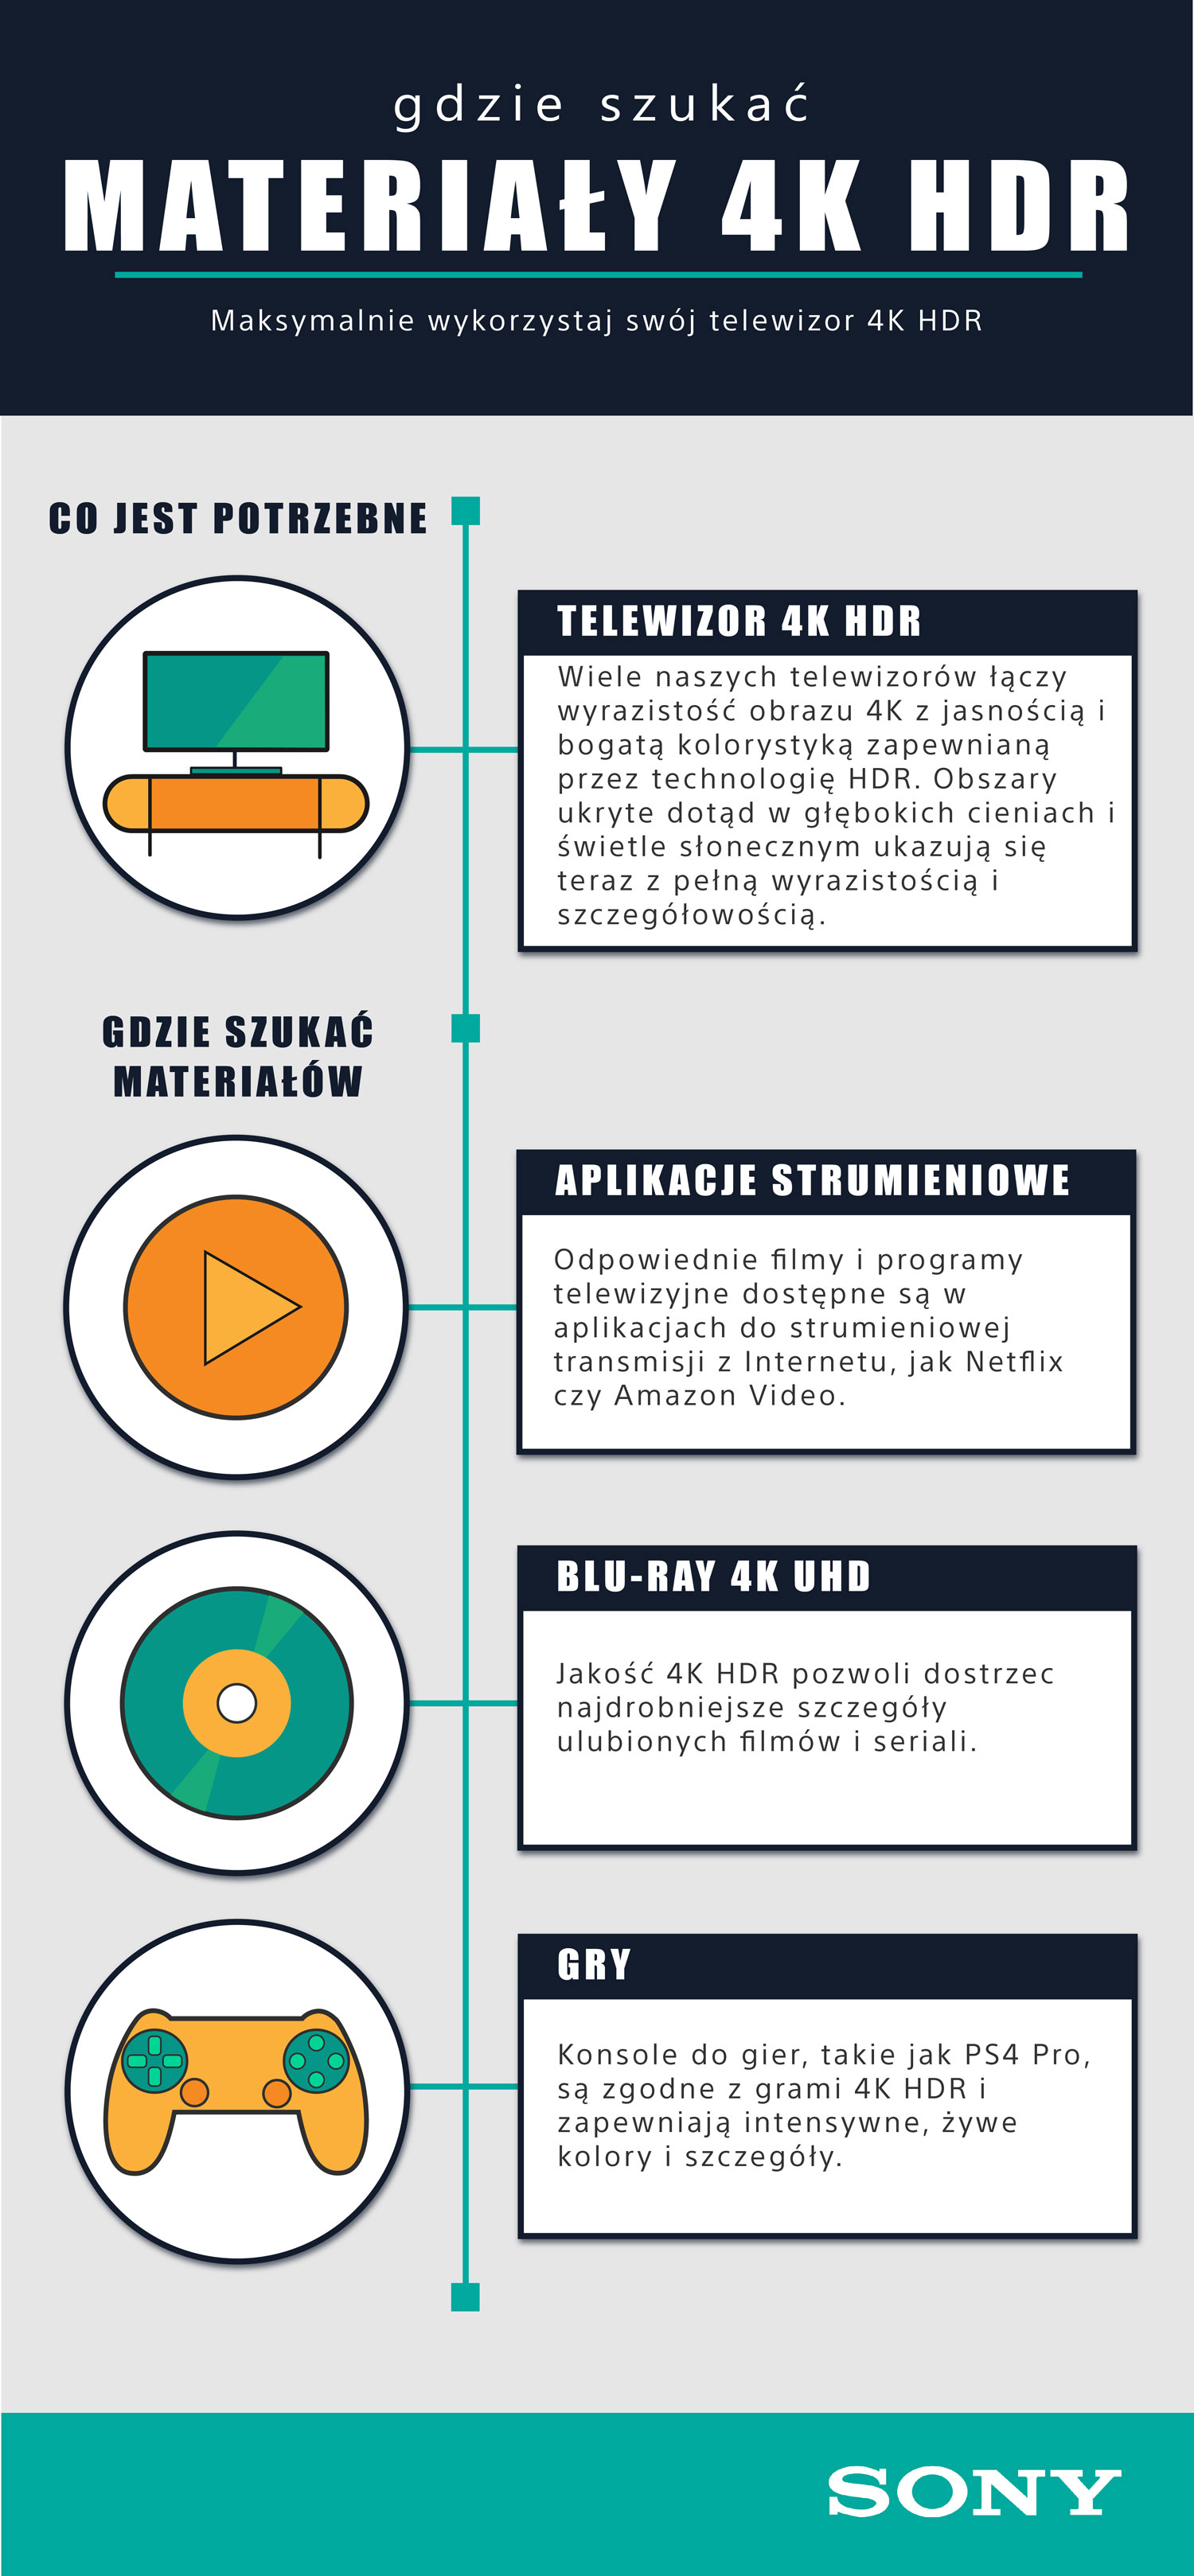 Where-to-Find-4K-HDR-Content-Infographic-POLISH.jpg